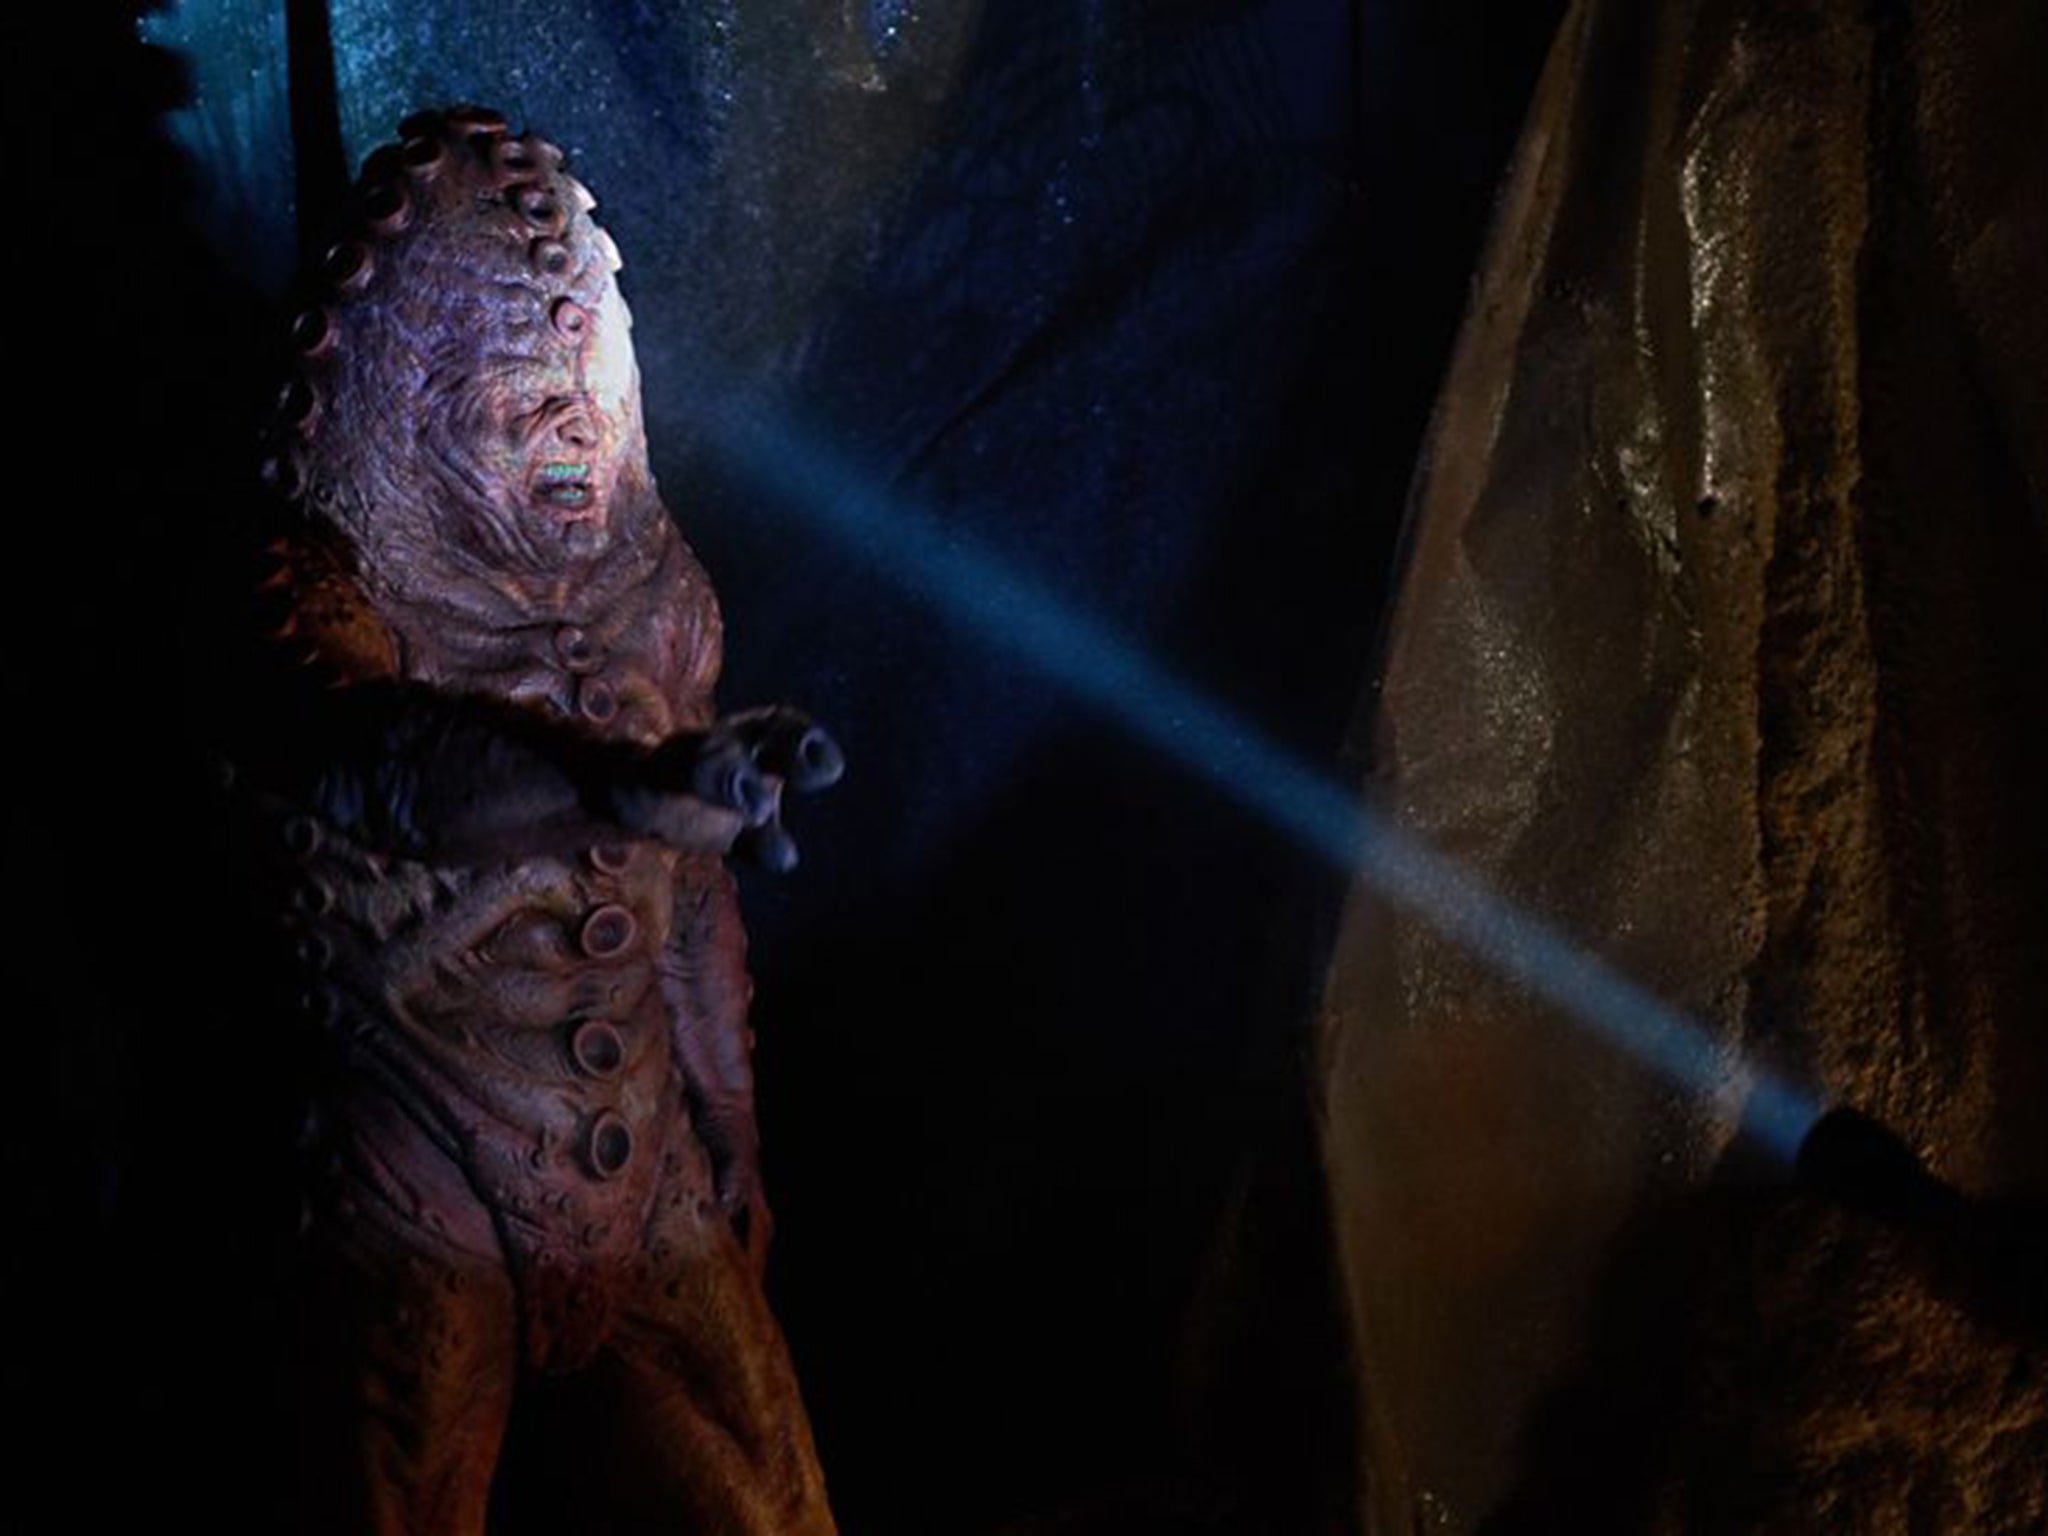 The Zygons have returned, tensions have flared, and a splinter group of the sucker-covered monstrosities is plotting revolution